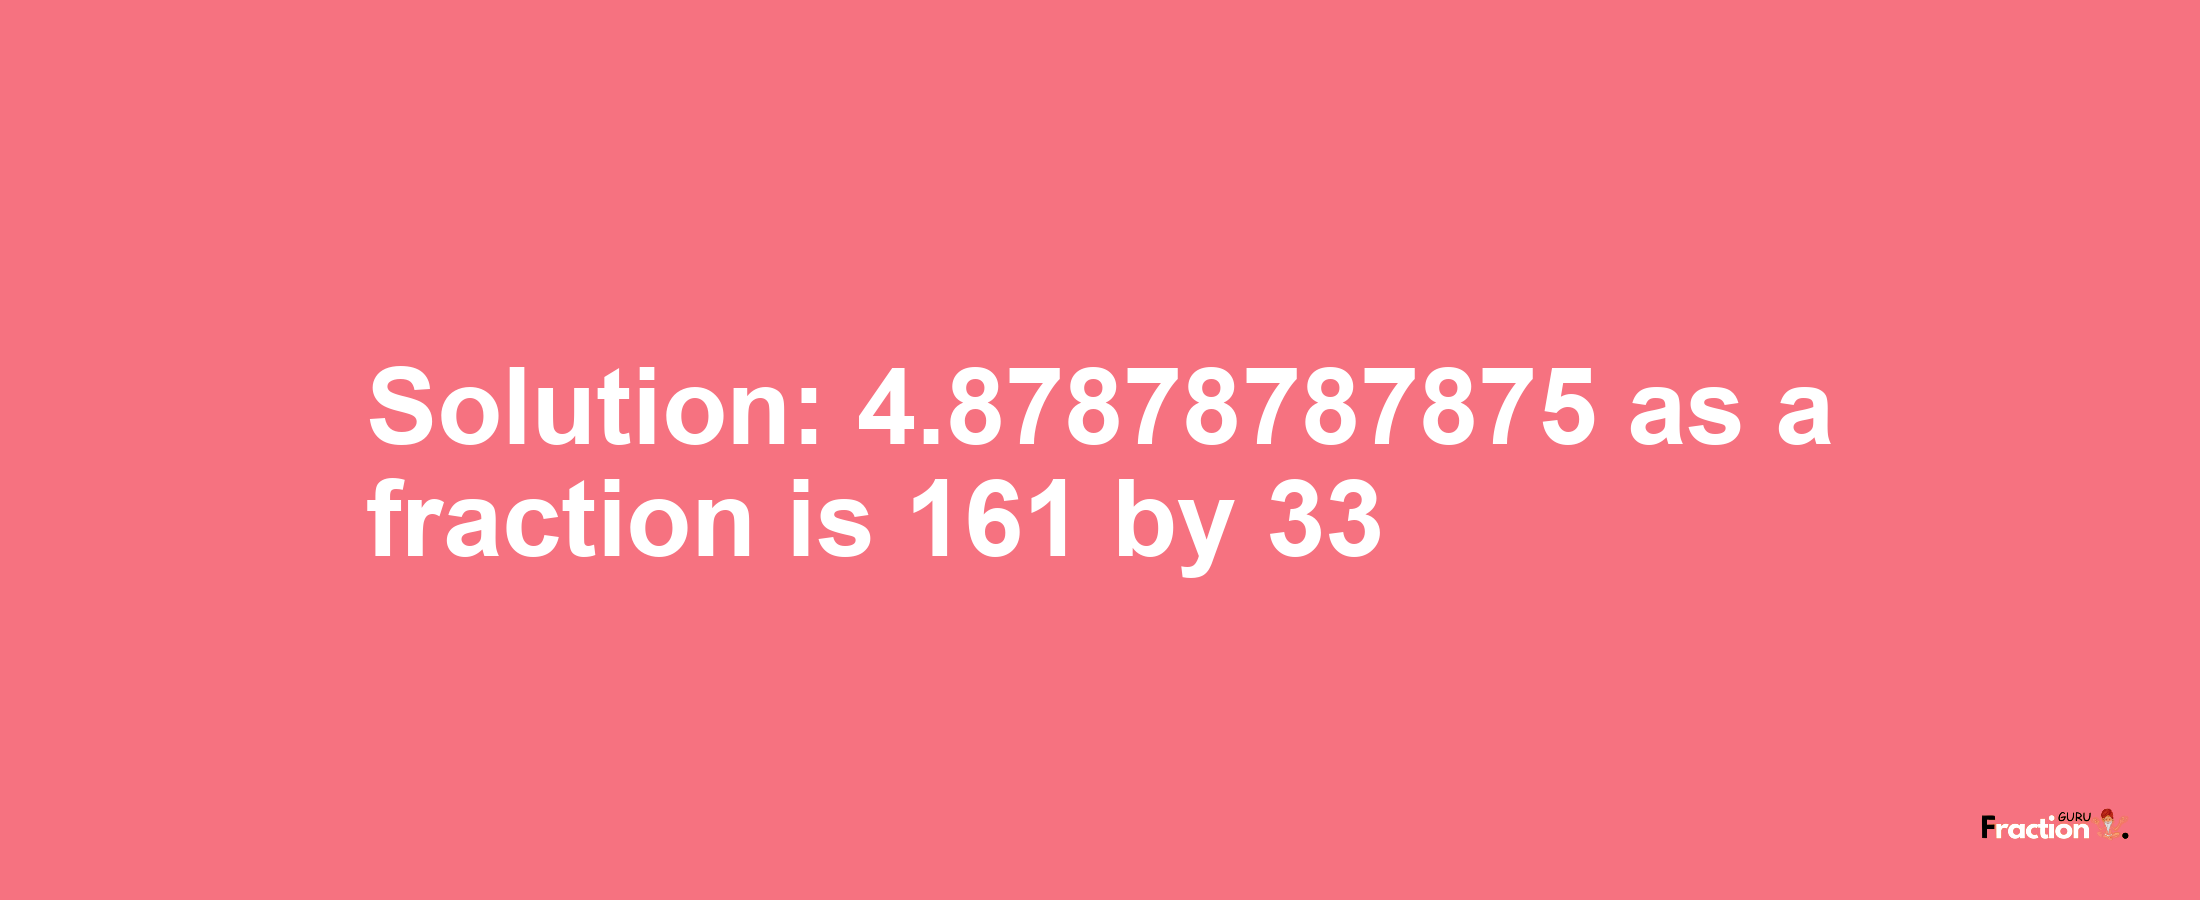 Solution:4.87878787875 as a fraction is 161/33